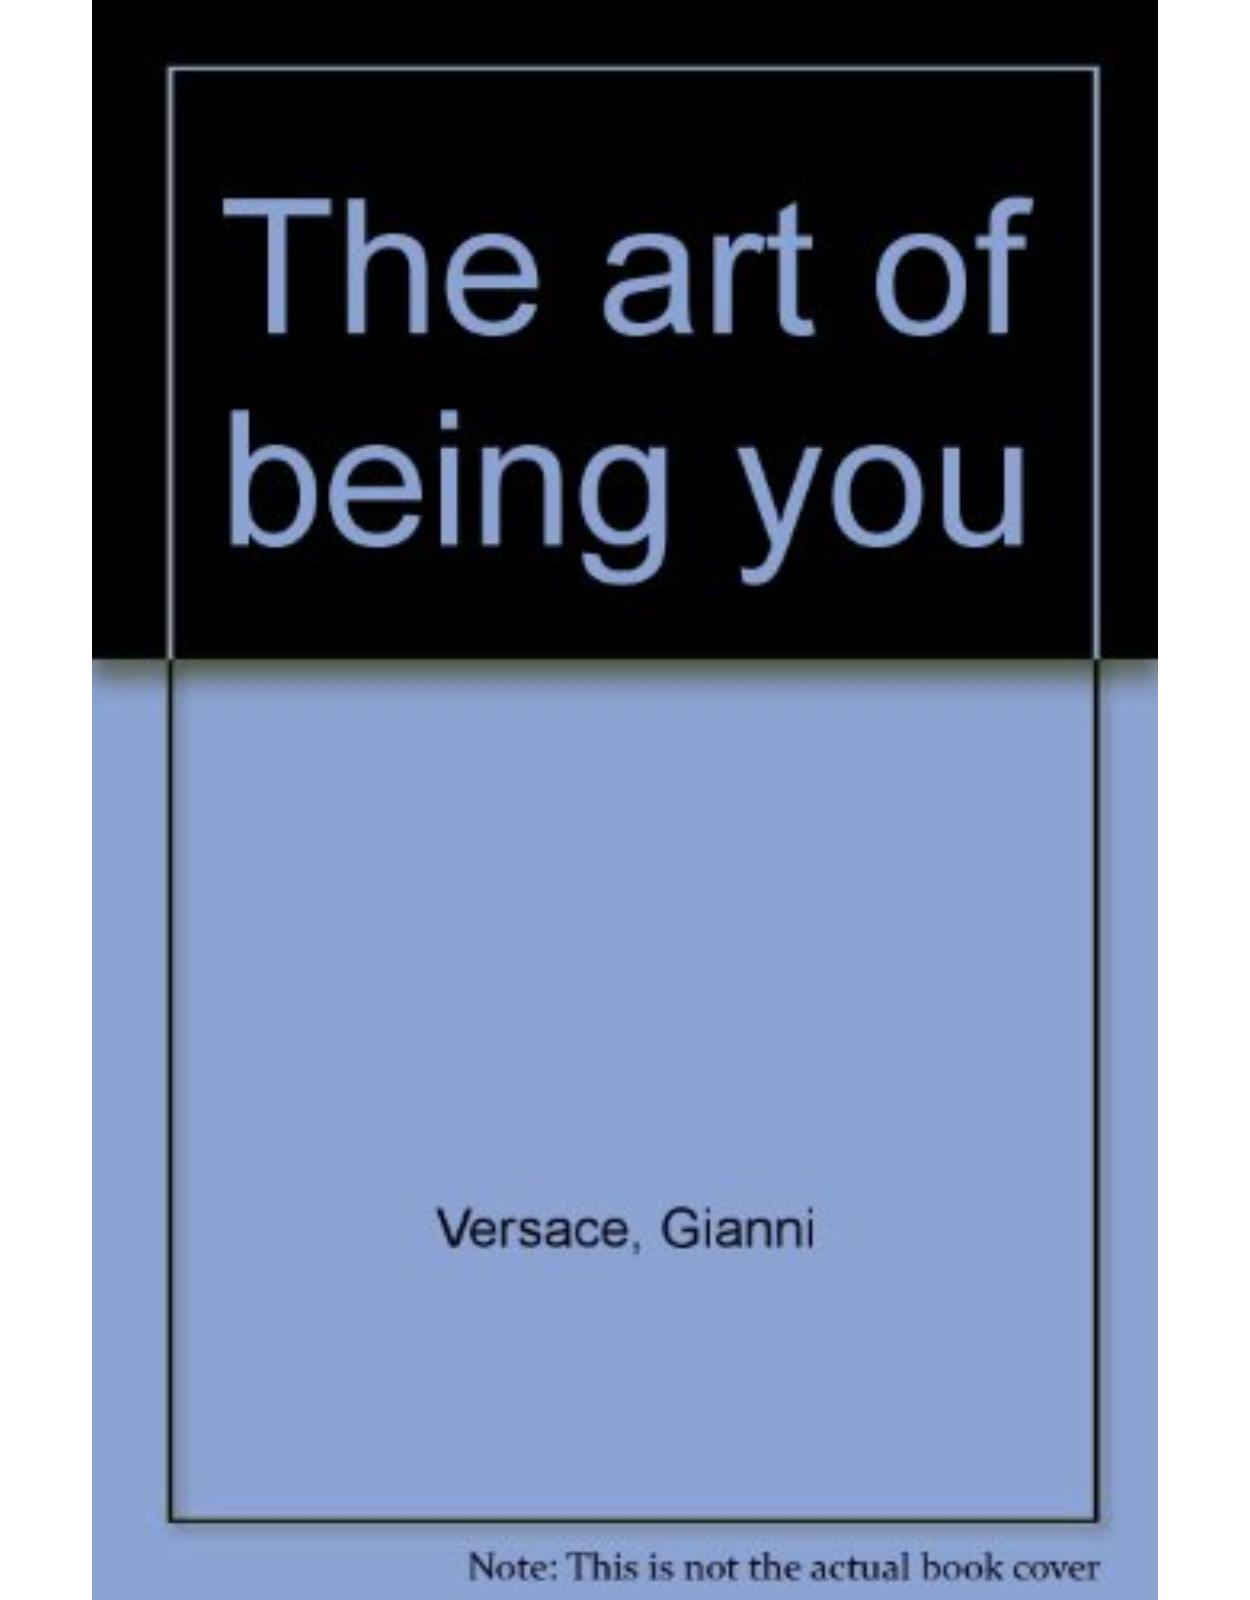 Gianni Versace. The art of being you